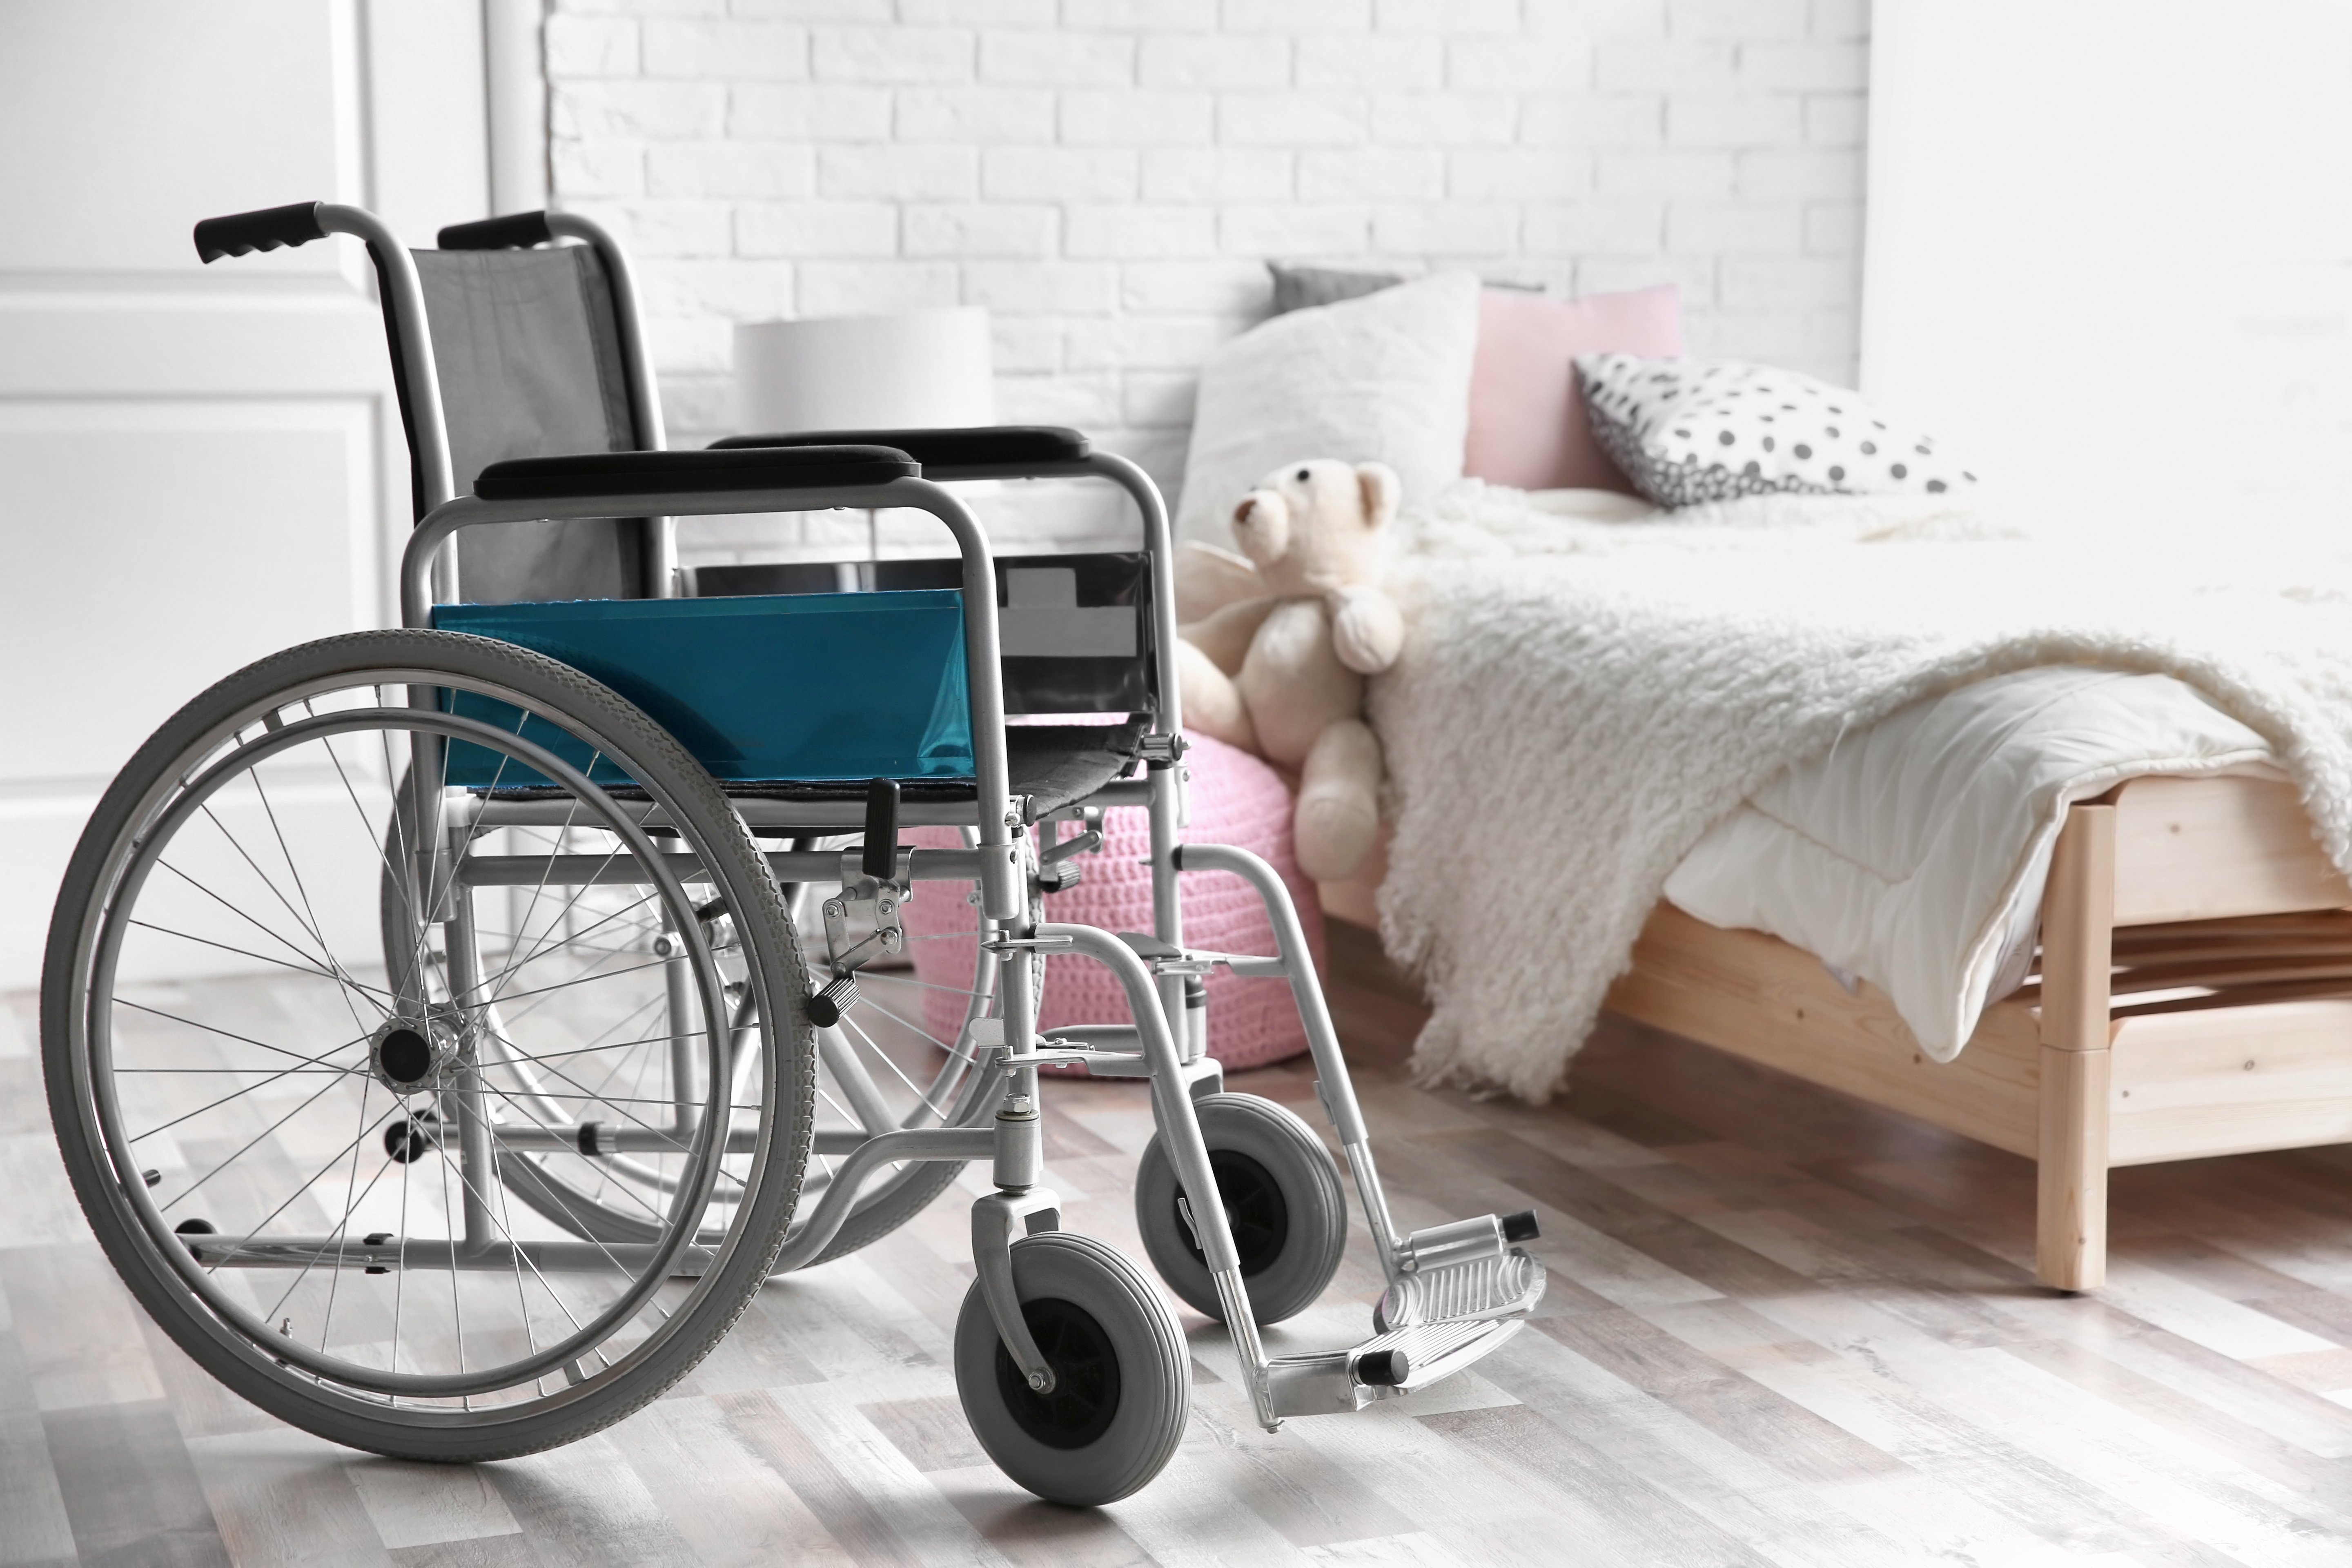 Picture of empty wheelchair next to a bed. | Source: Shutterstock